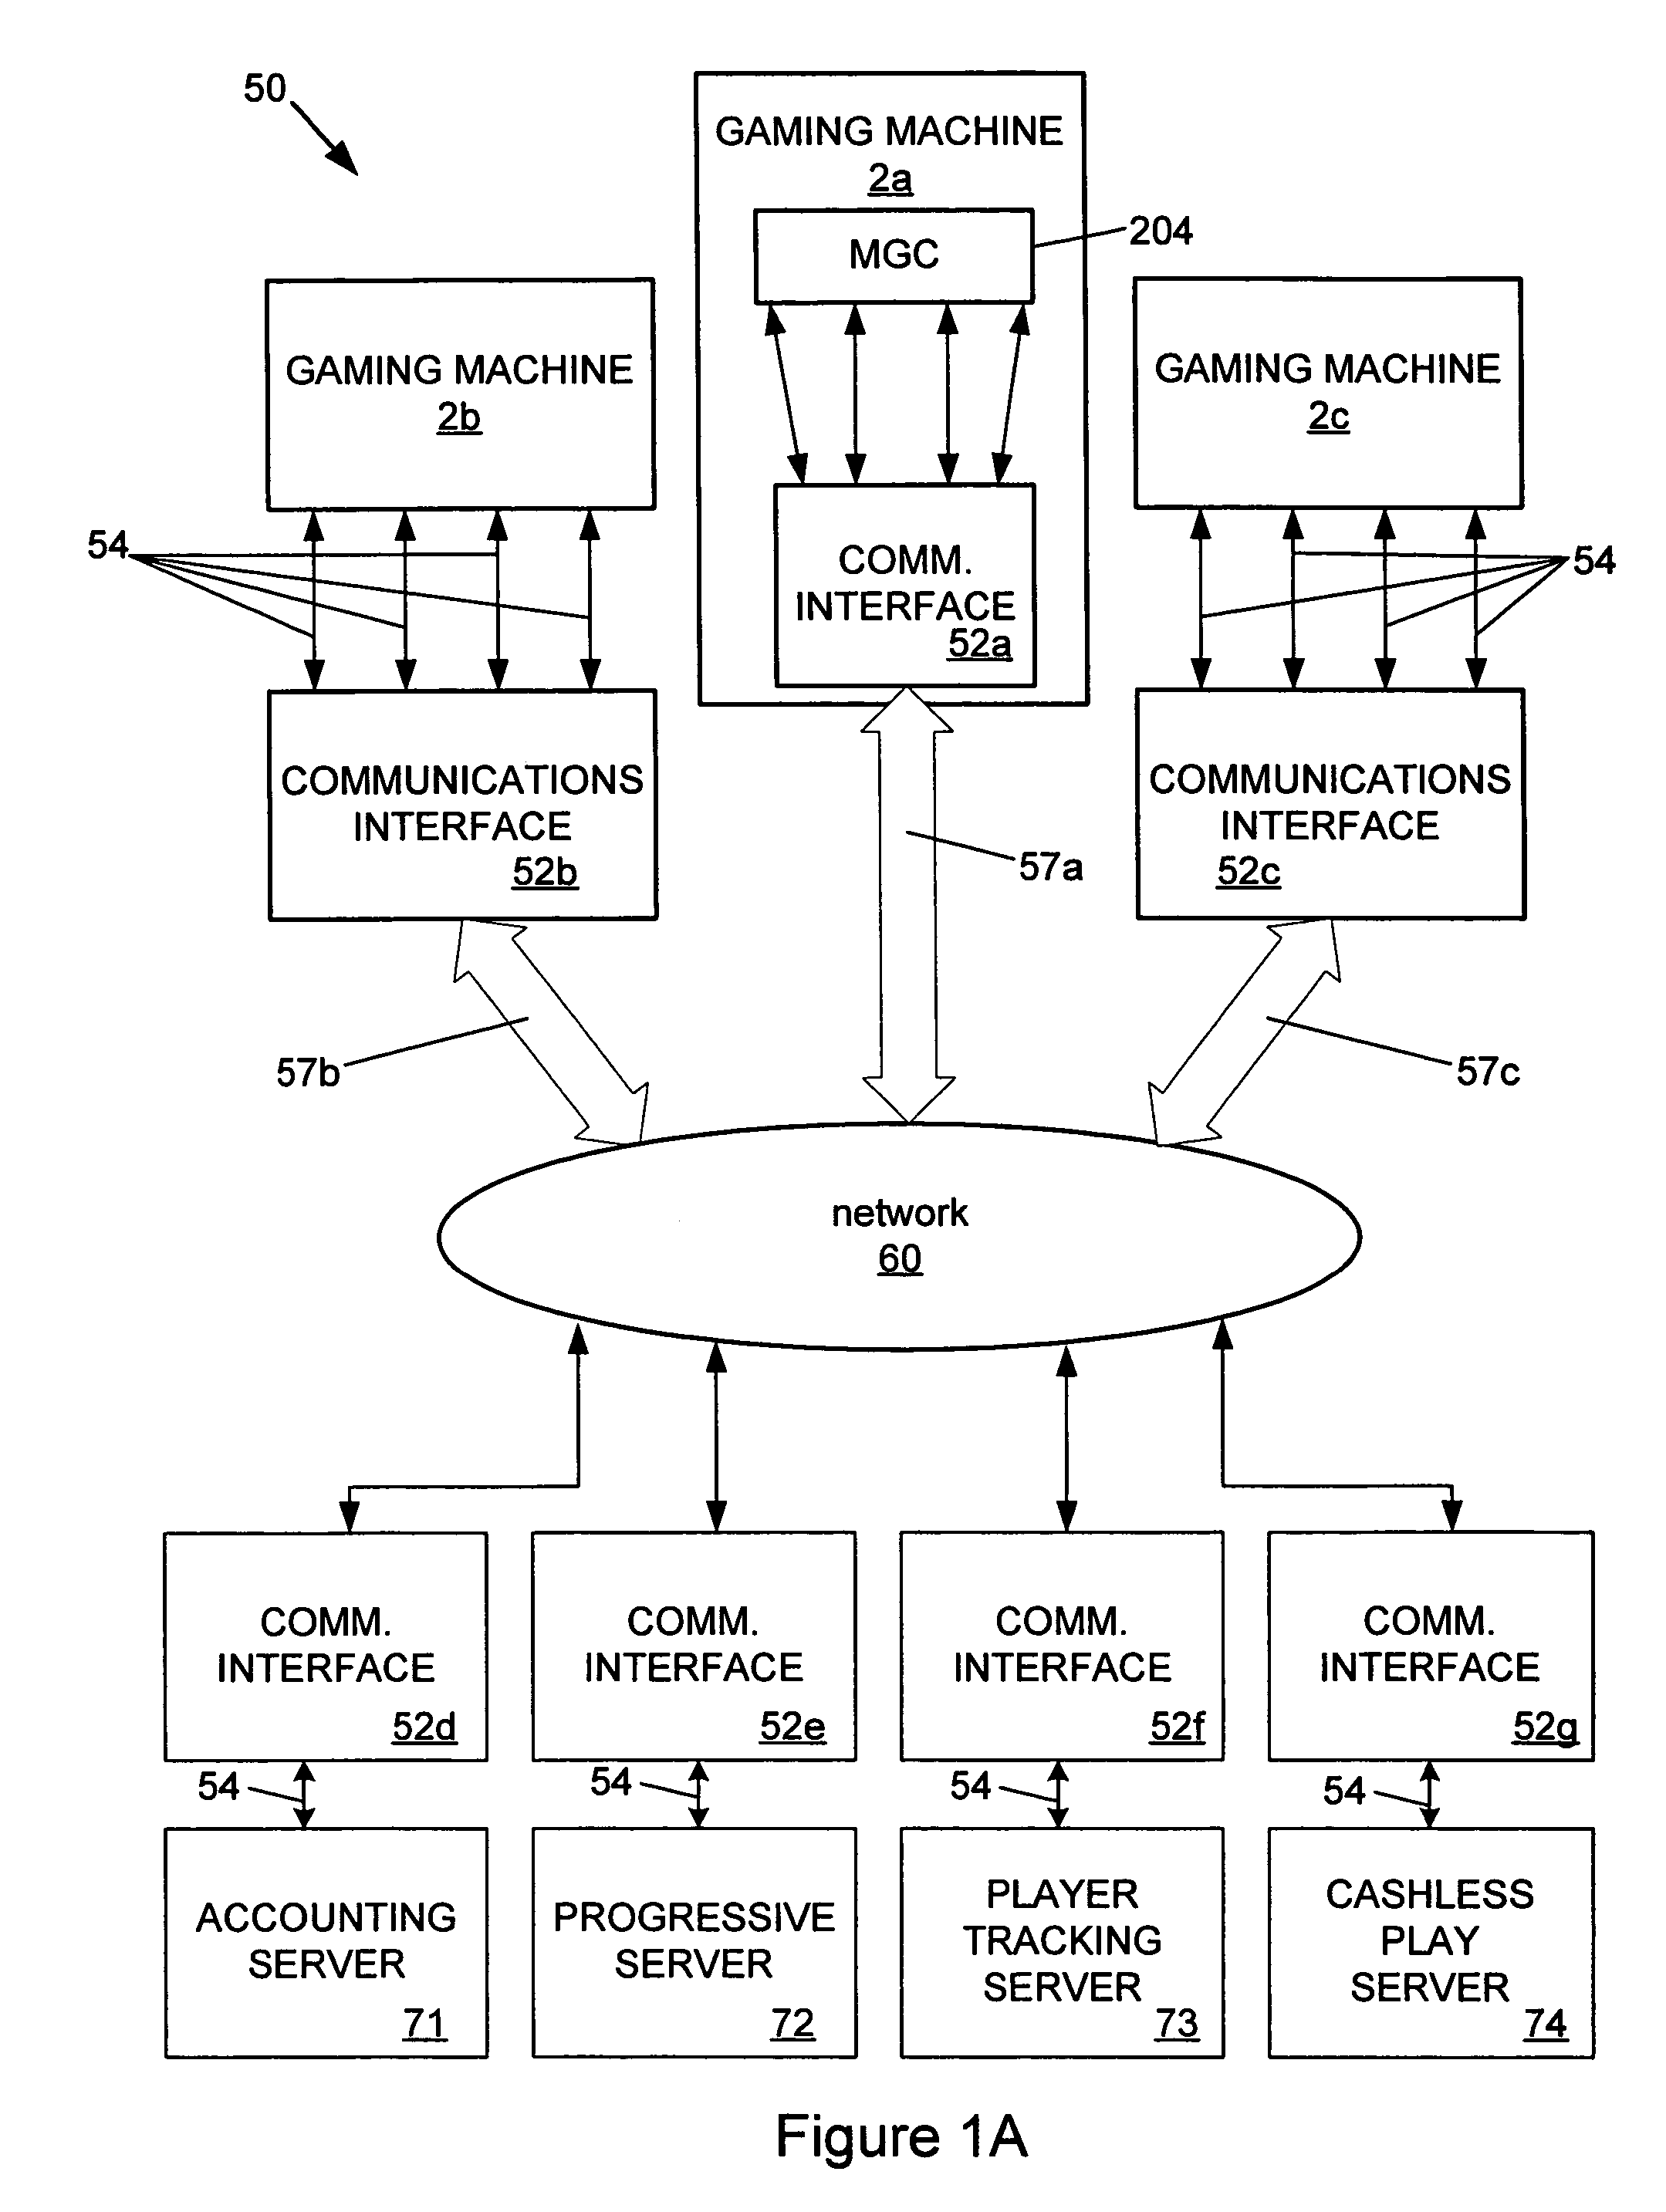 Open architecture communications in a gaming network